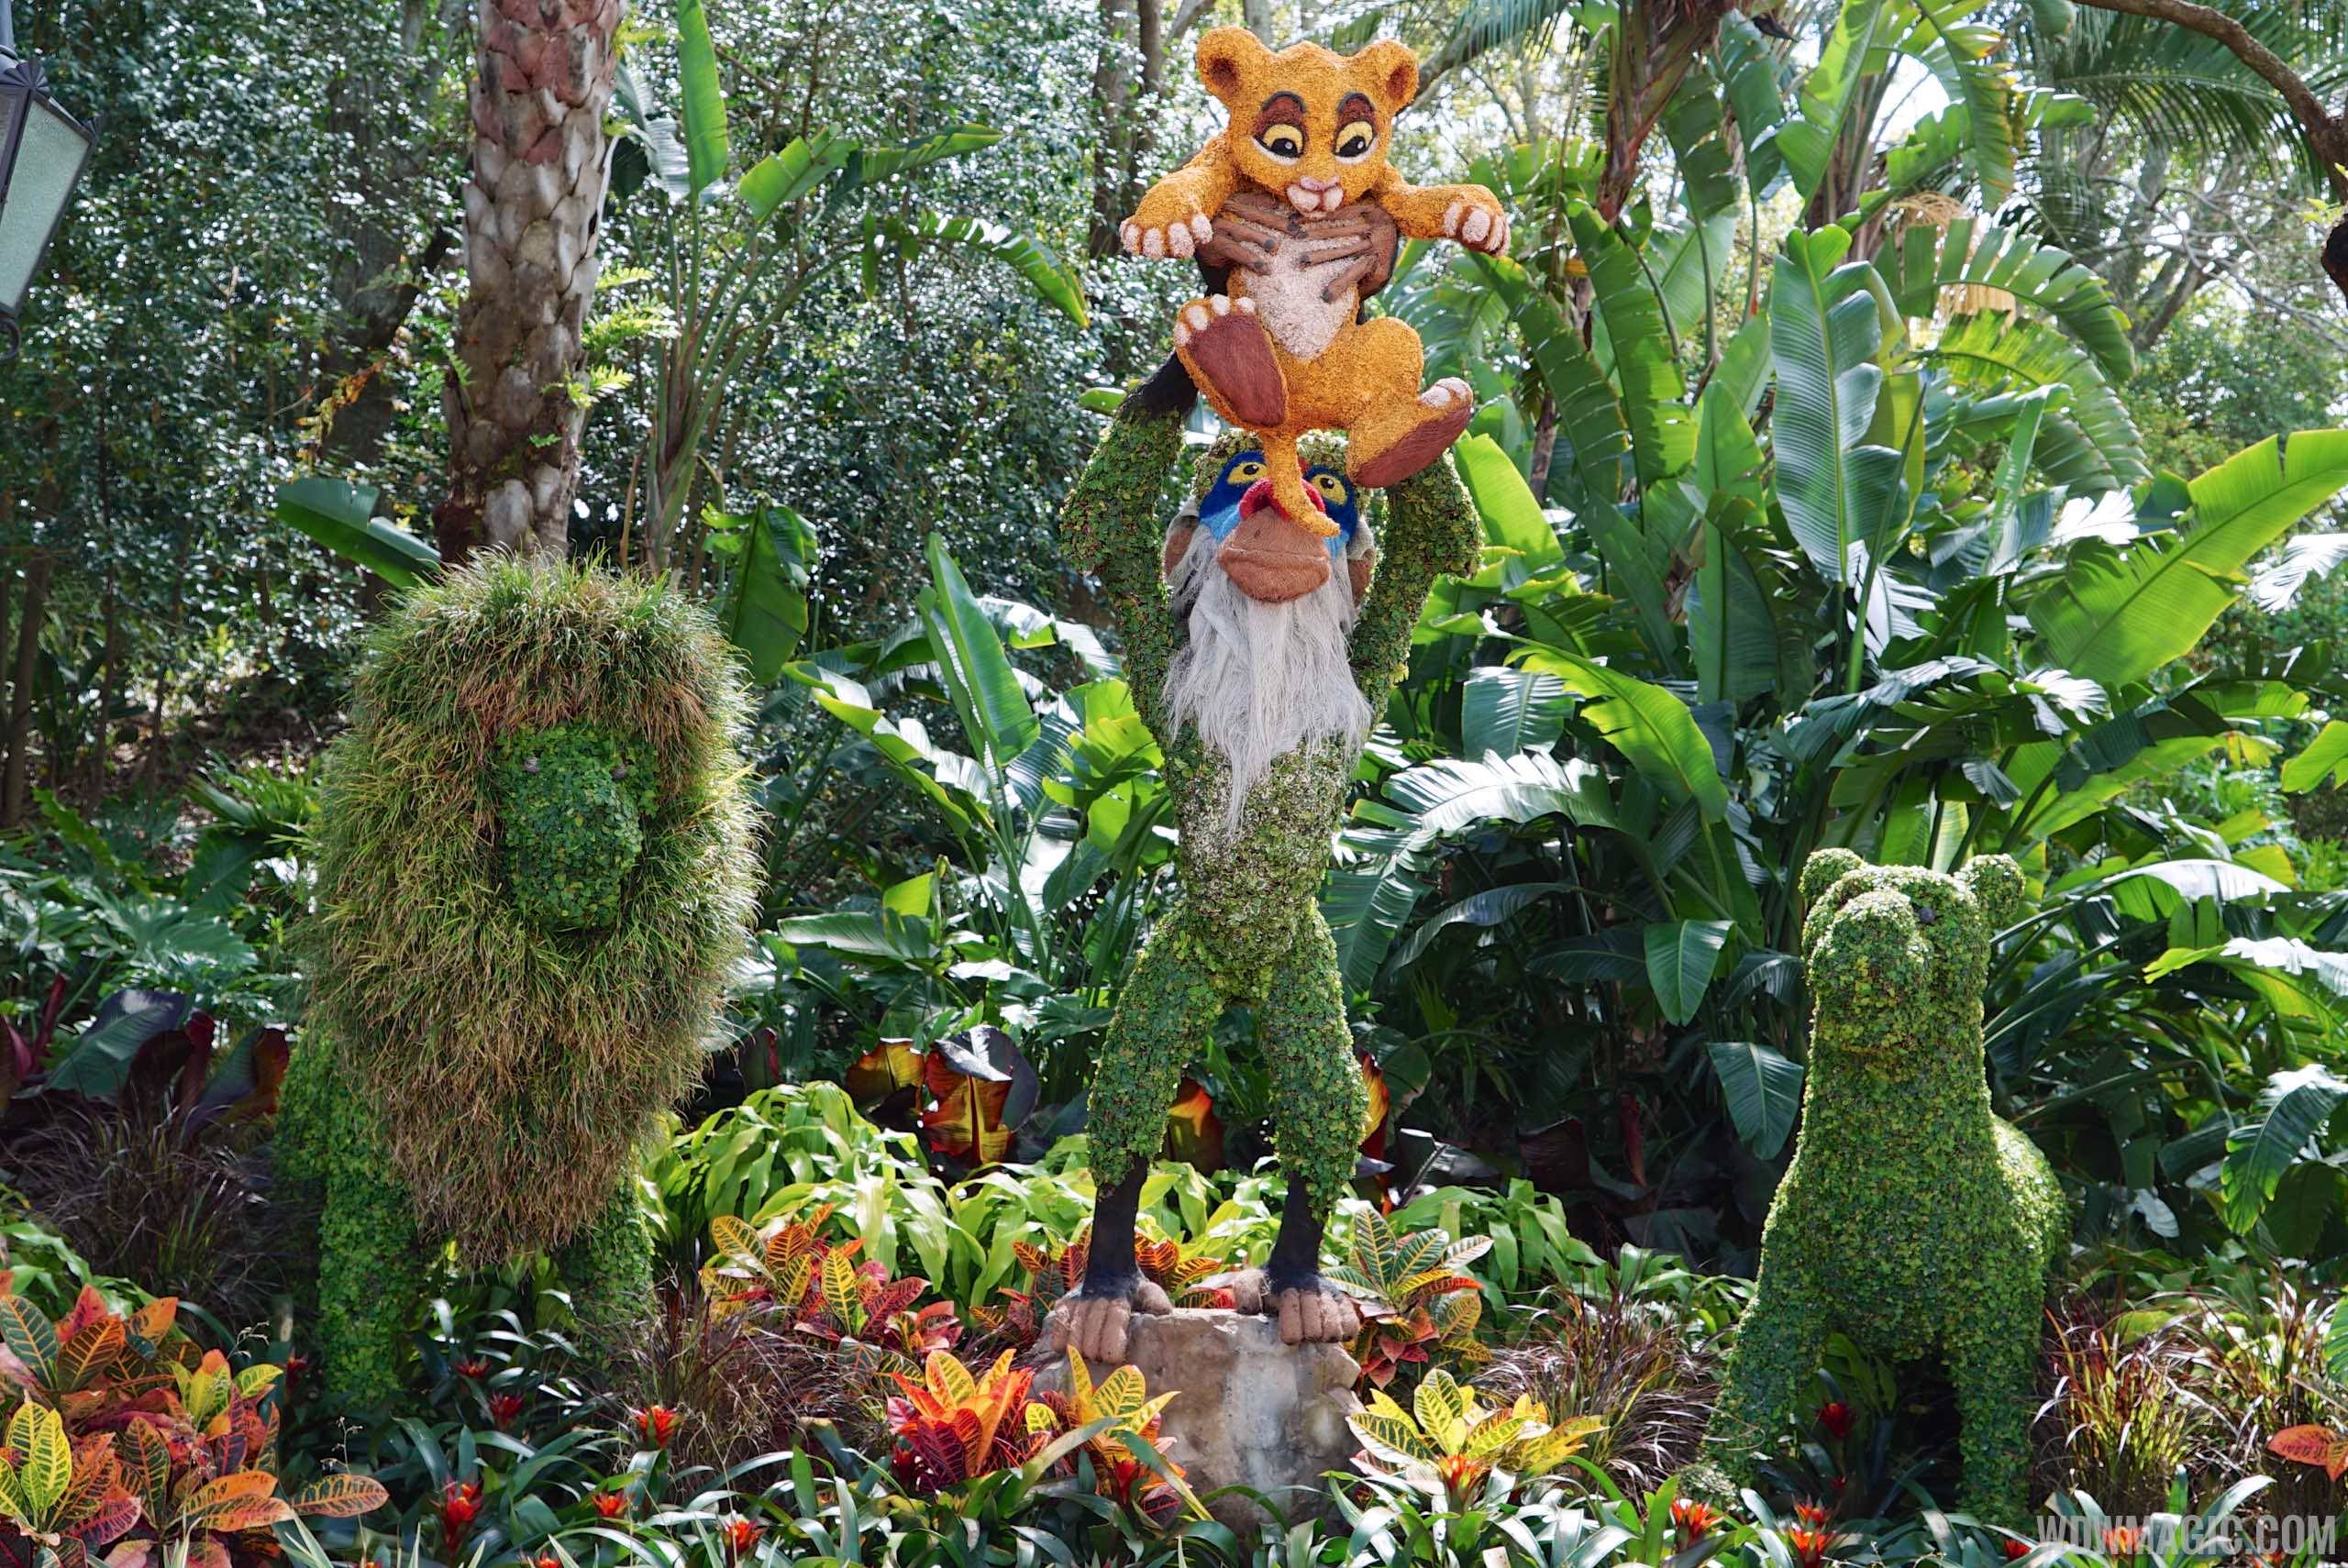 2015 Epcot Flower and Garden Festival - Lion King topiary